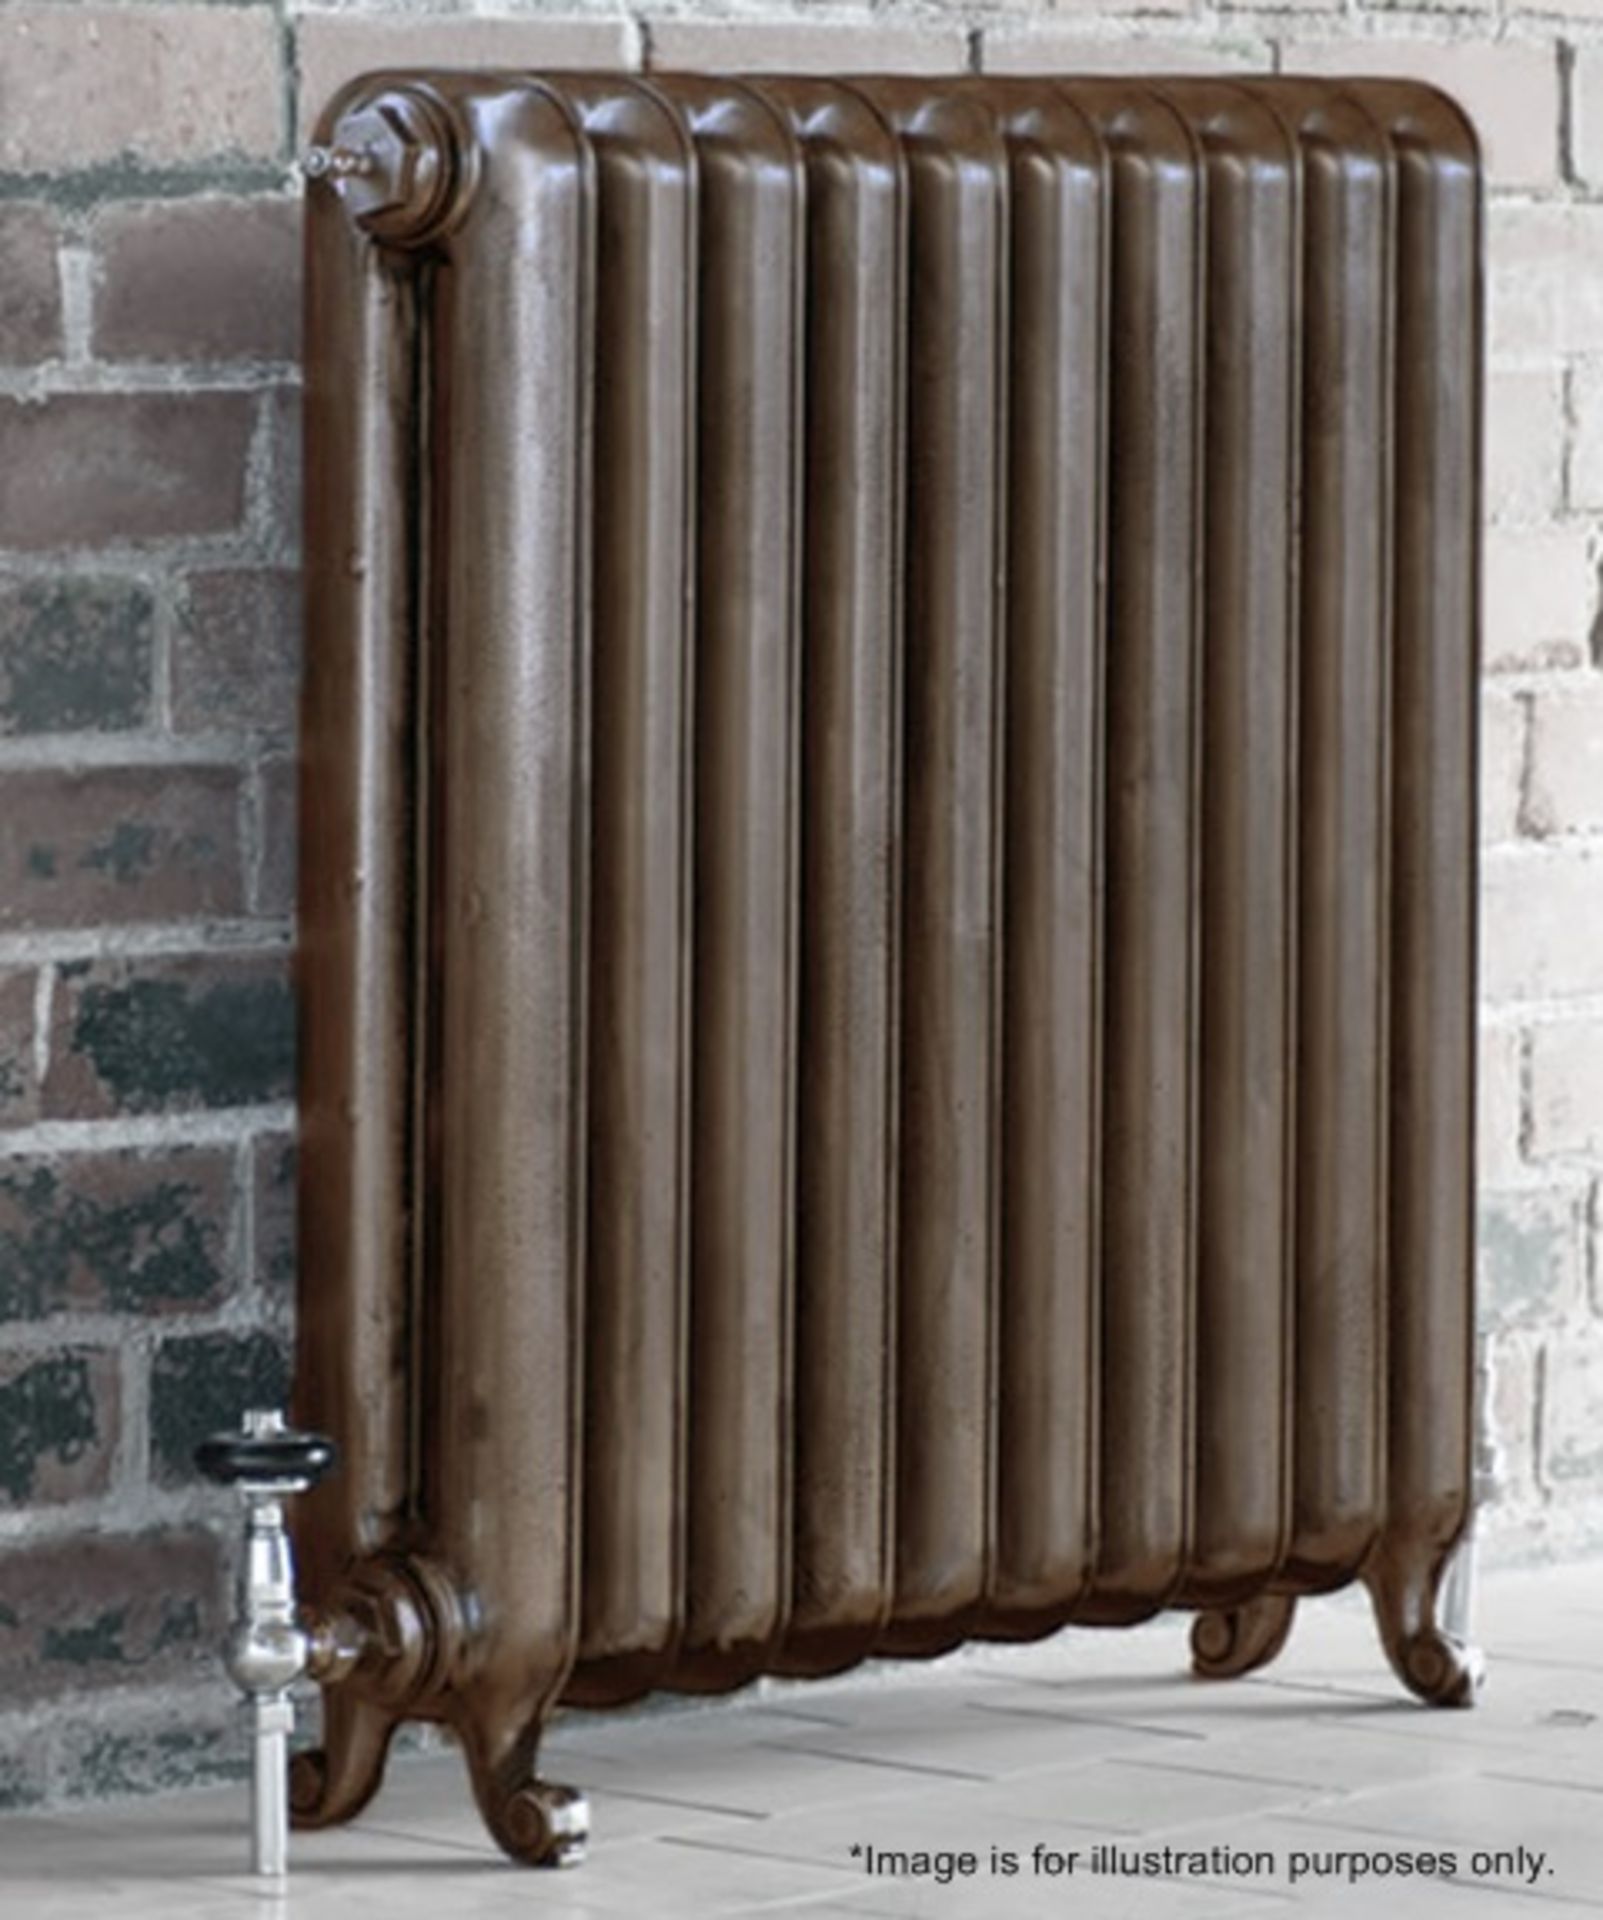 1 x Reclaimed Vintage Traditional Cast Iron 14-Section Radiator - Dimensions: W95 x W107cm